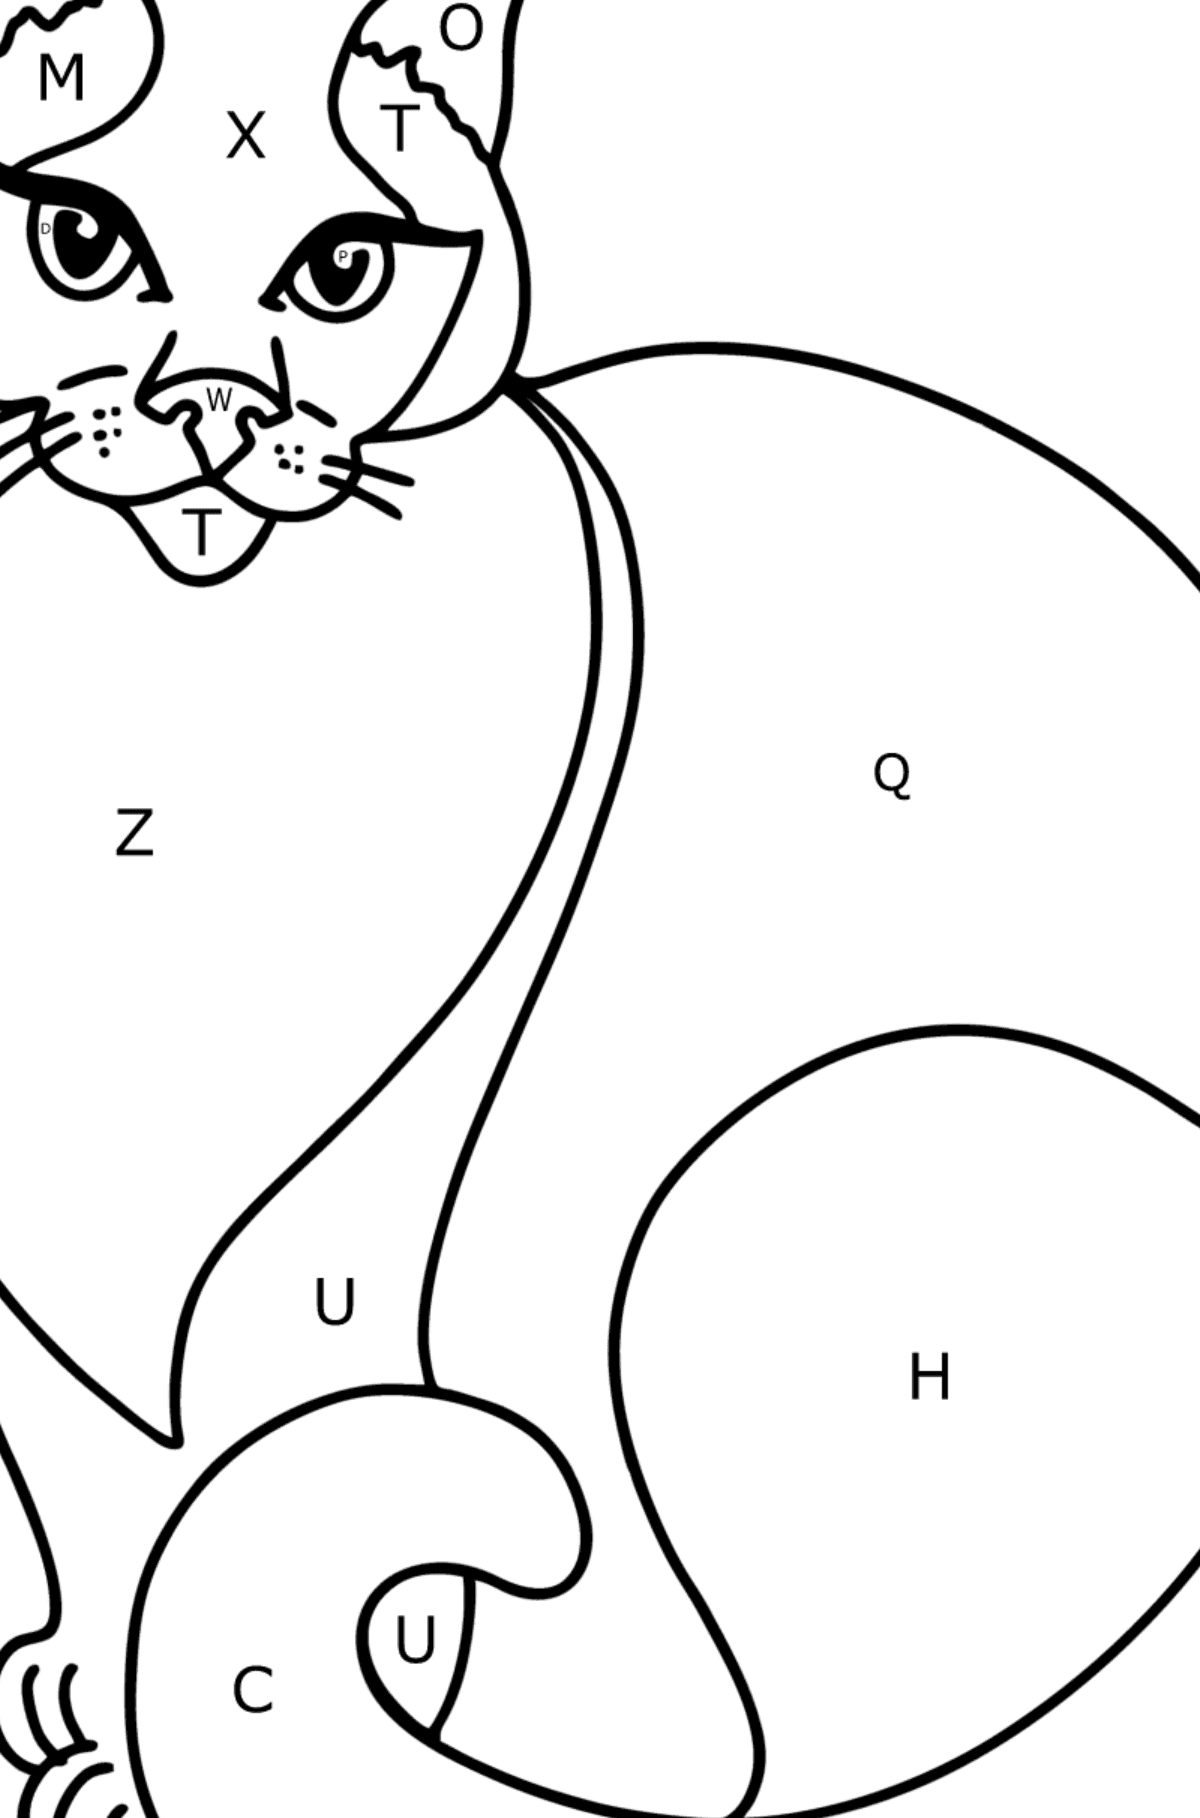 Siamese Cat coloring page - Coloring by Letters for Kids